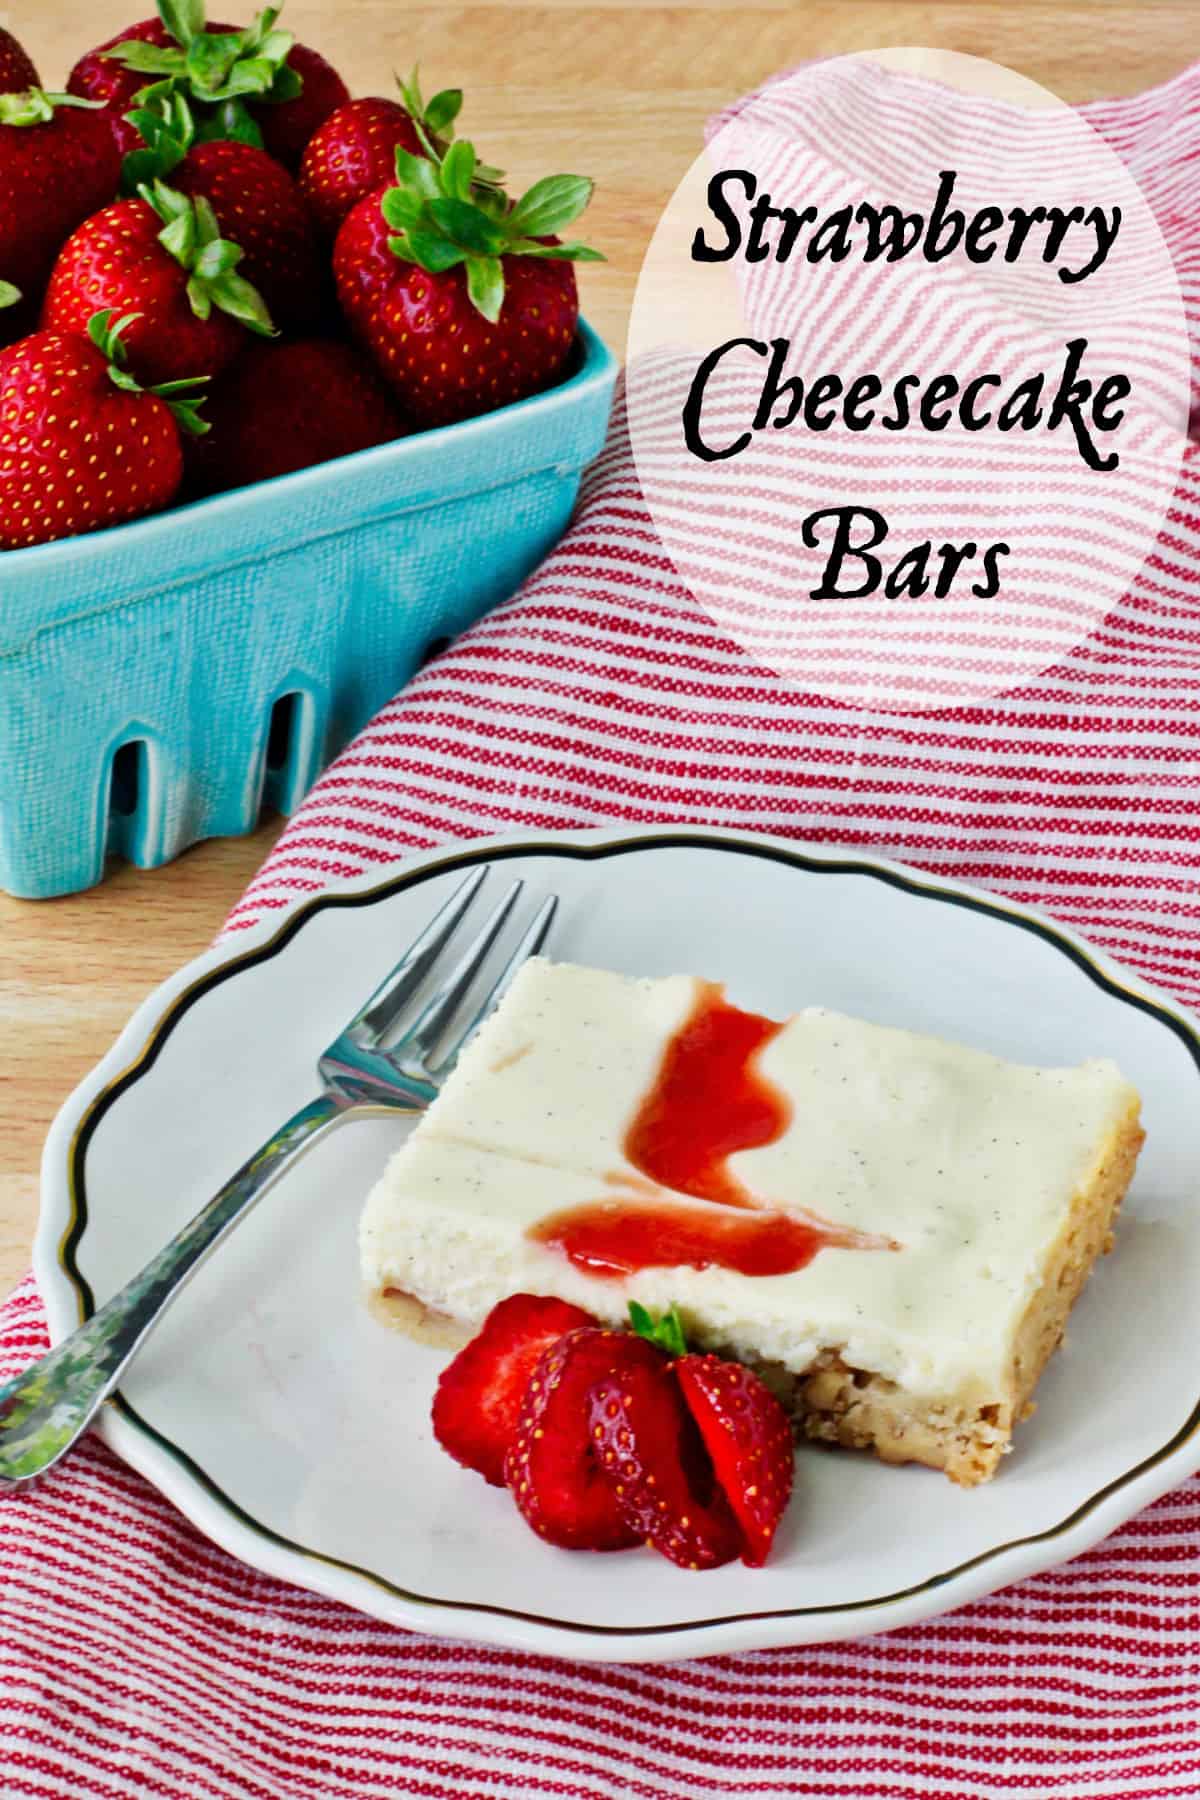 Strawberry Cheesecake Bar with a strawberry topping.